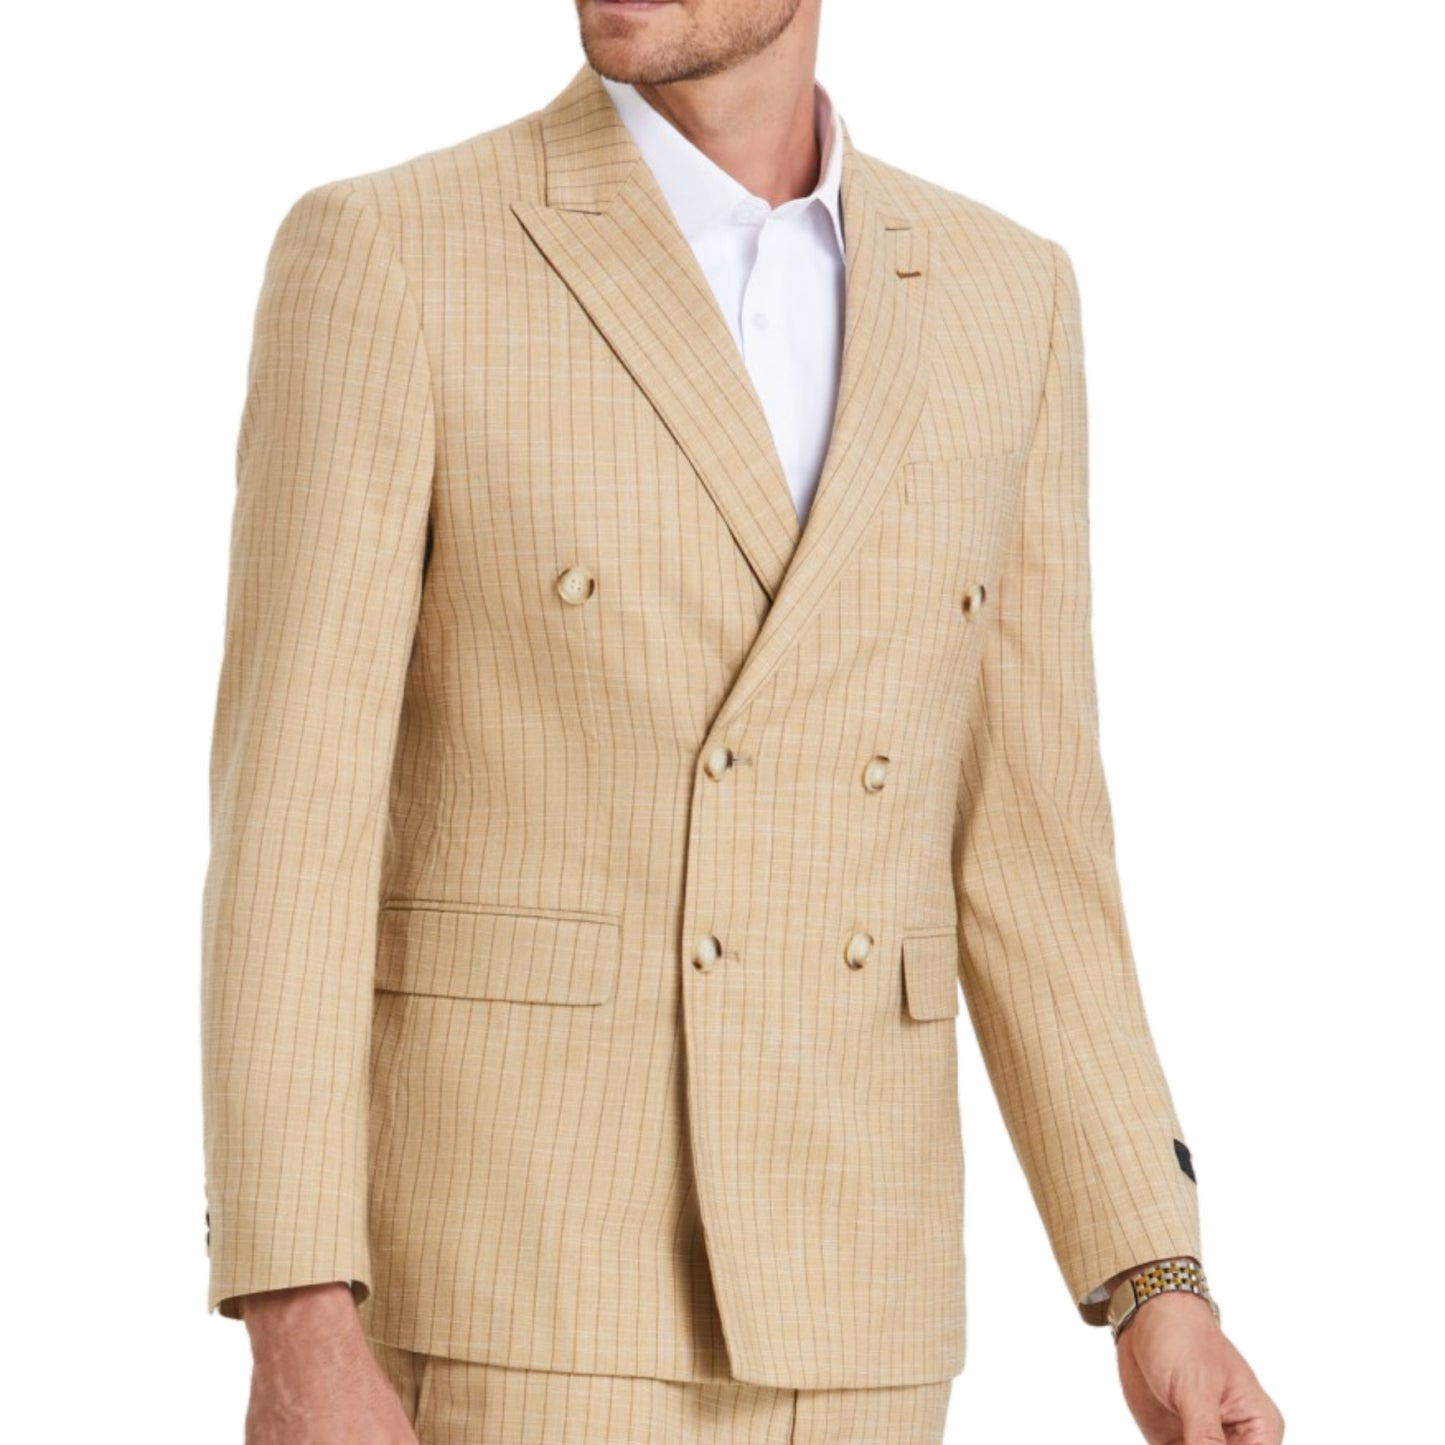 Stylish KCT Menswear Tan Glen Plaid Double-Breasted Suit perfect for summer events and professional wear"